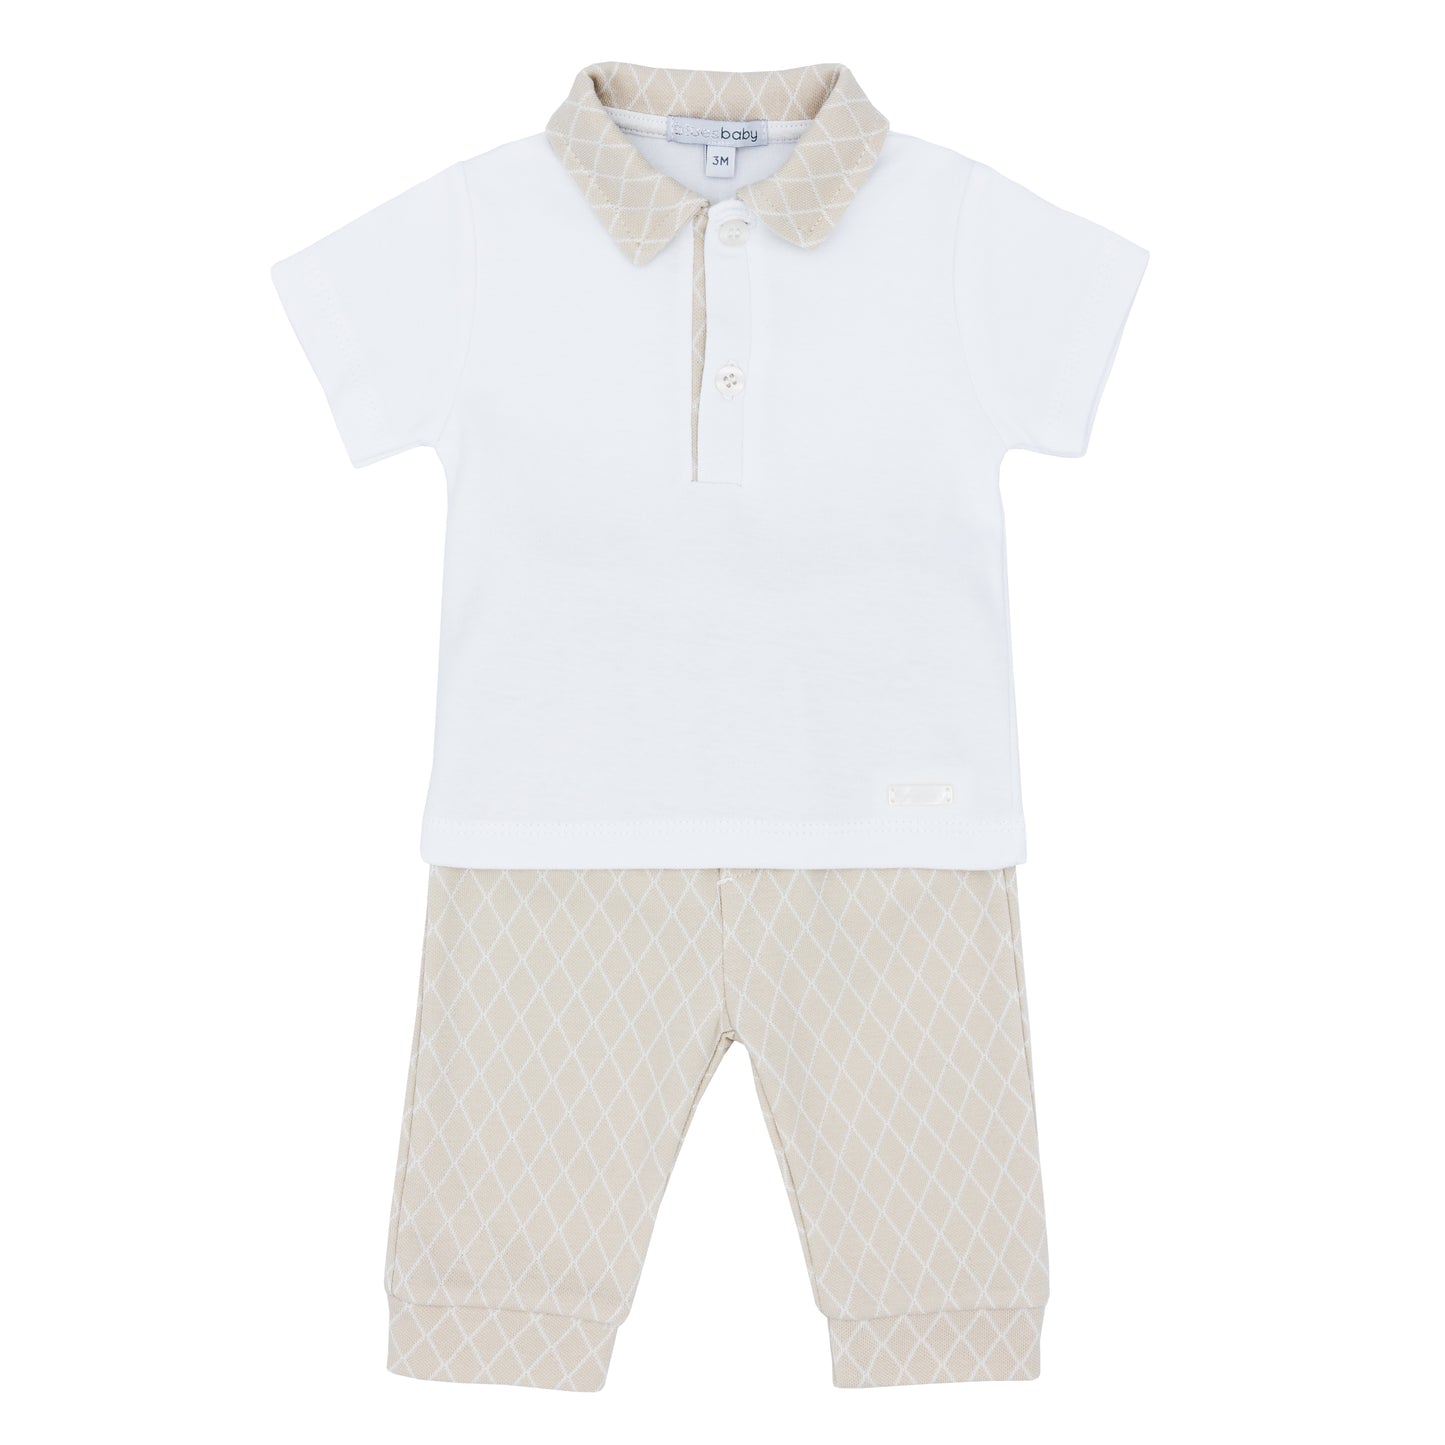 Blues Baby Boys Milan Collection Stone Top & Pants